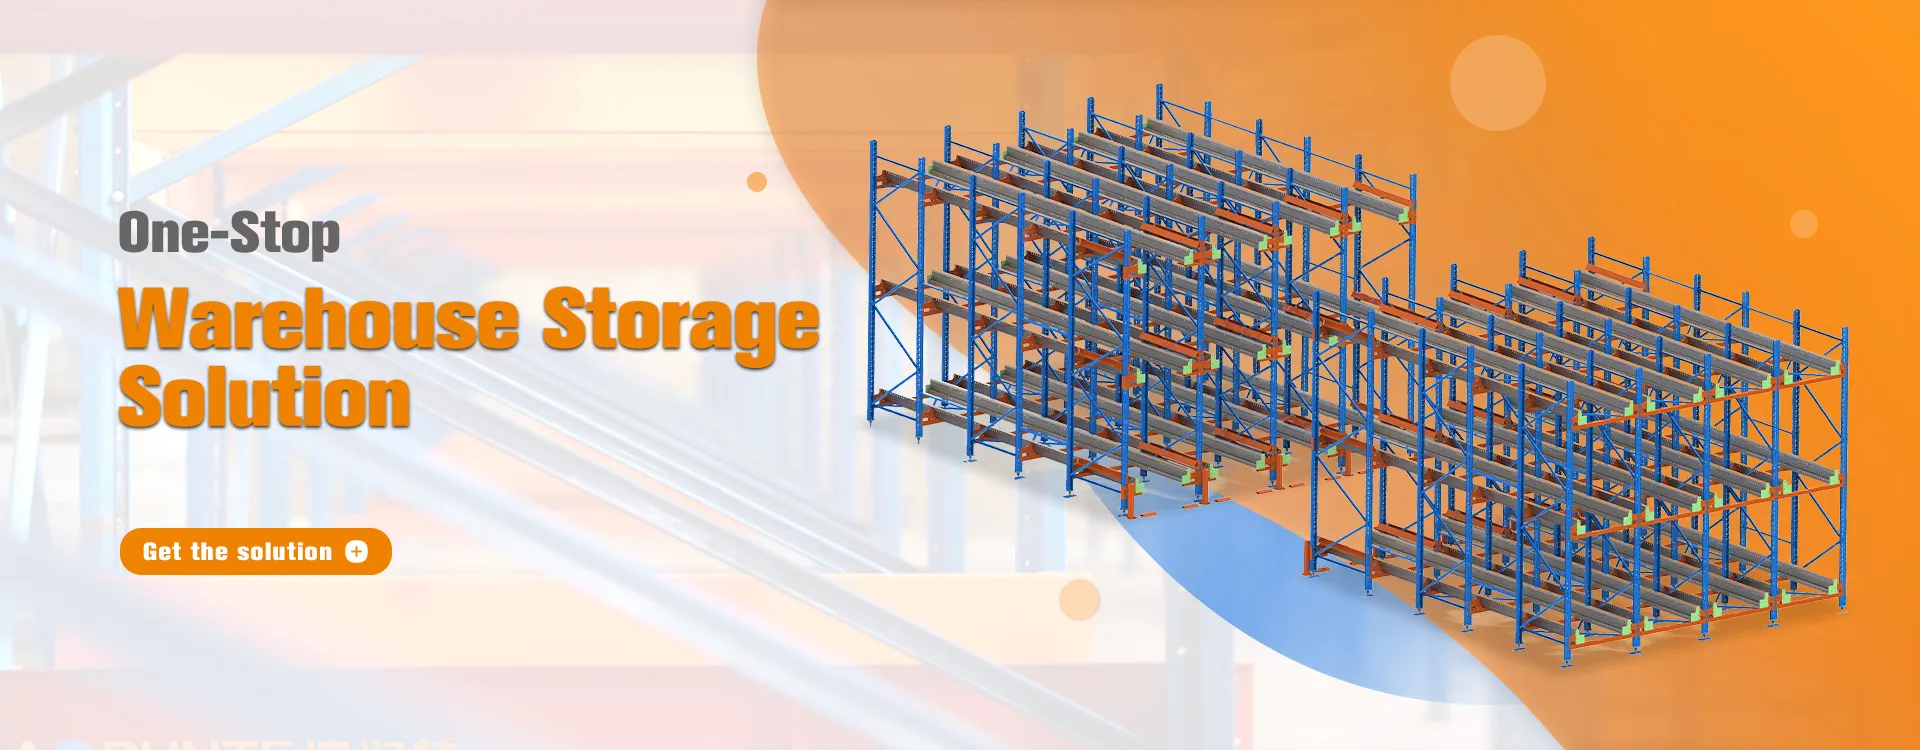 One-Stop Warehouse Storage Solution